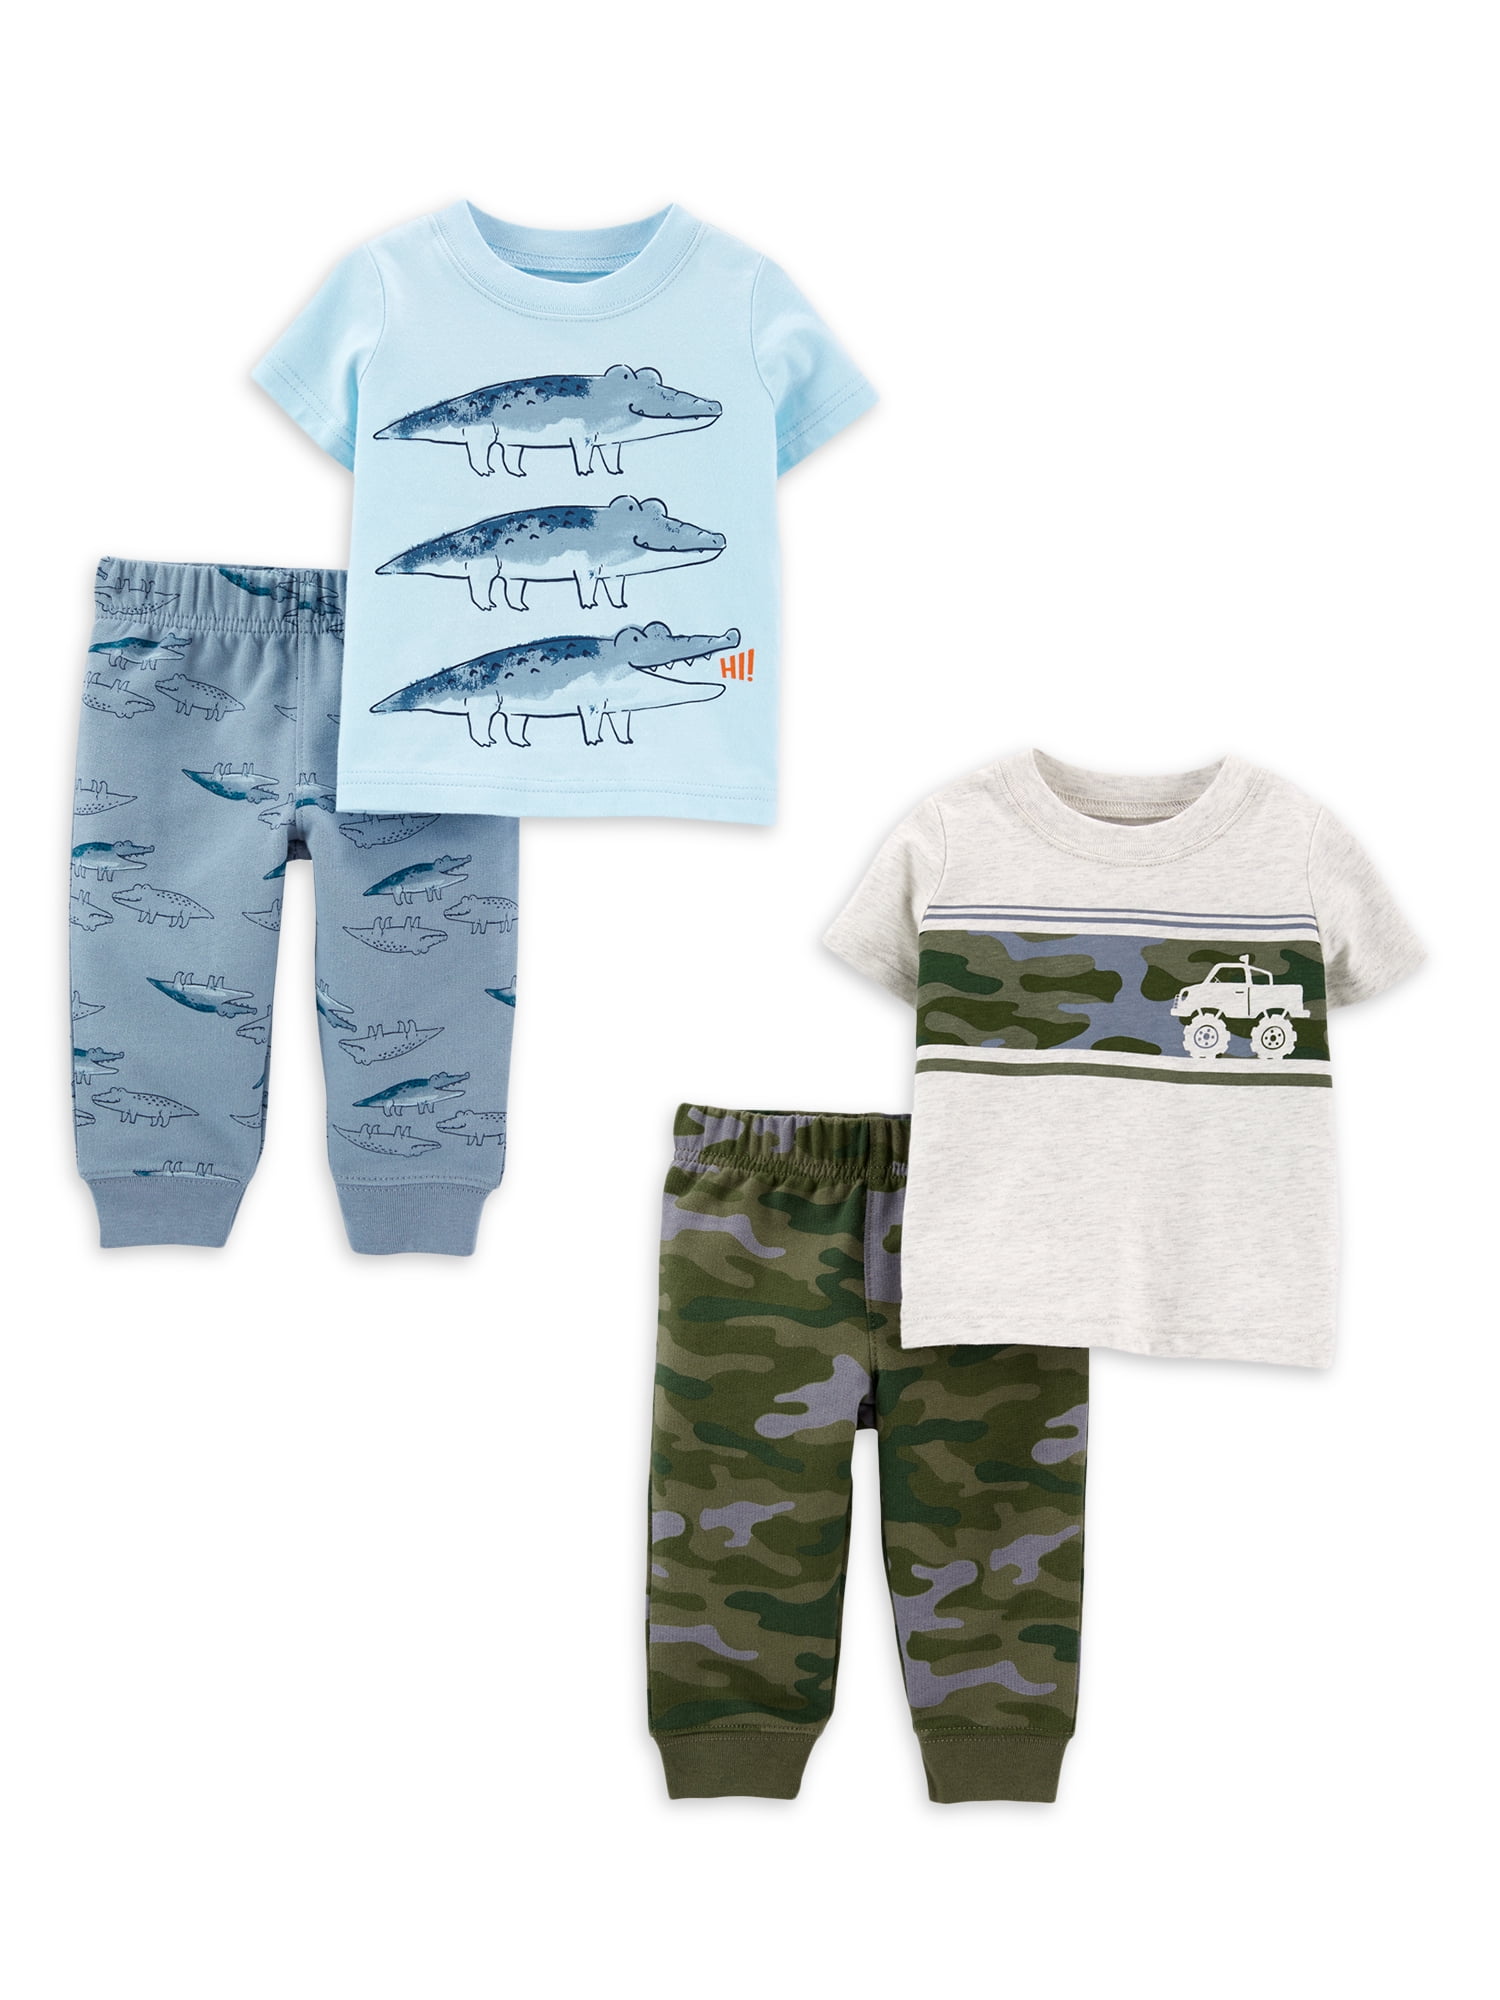 NEW Age 6-9 Months Safari Print Top and Joggers Baby Boy 